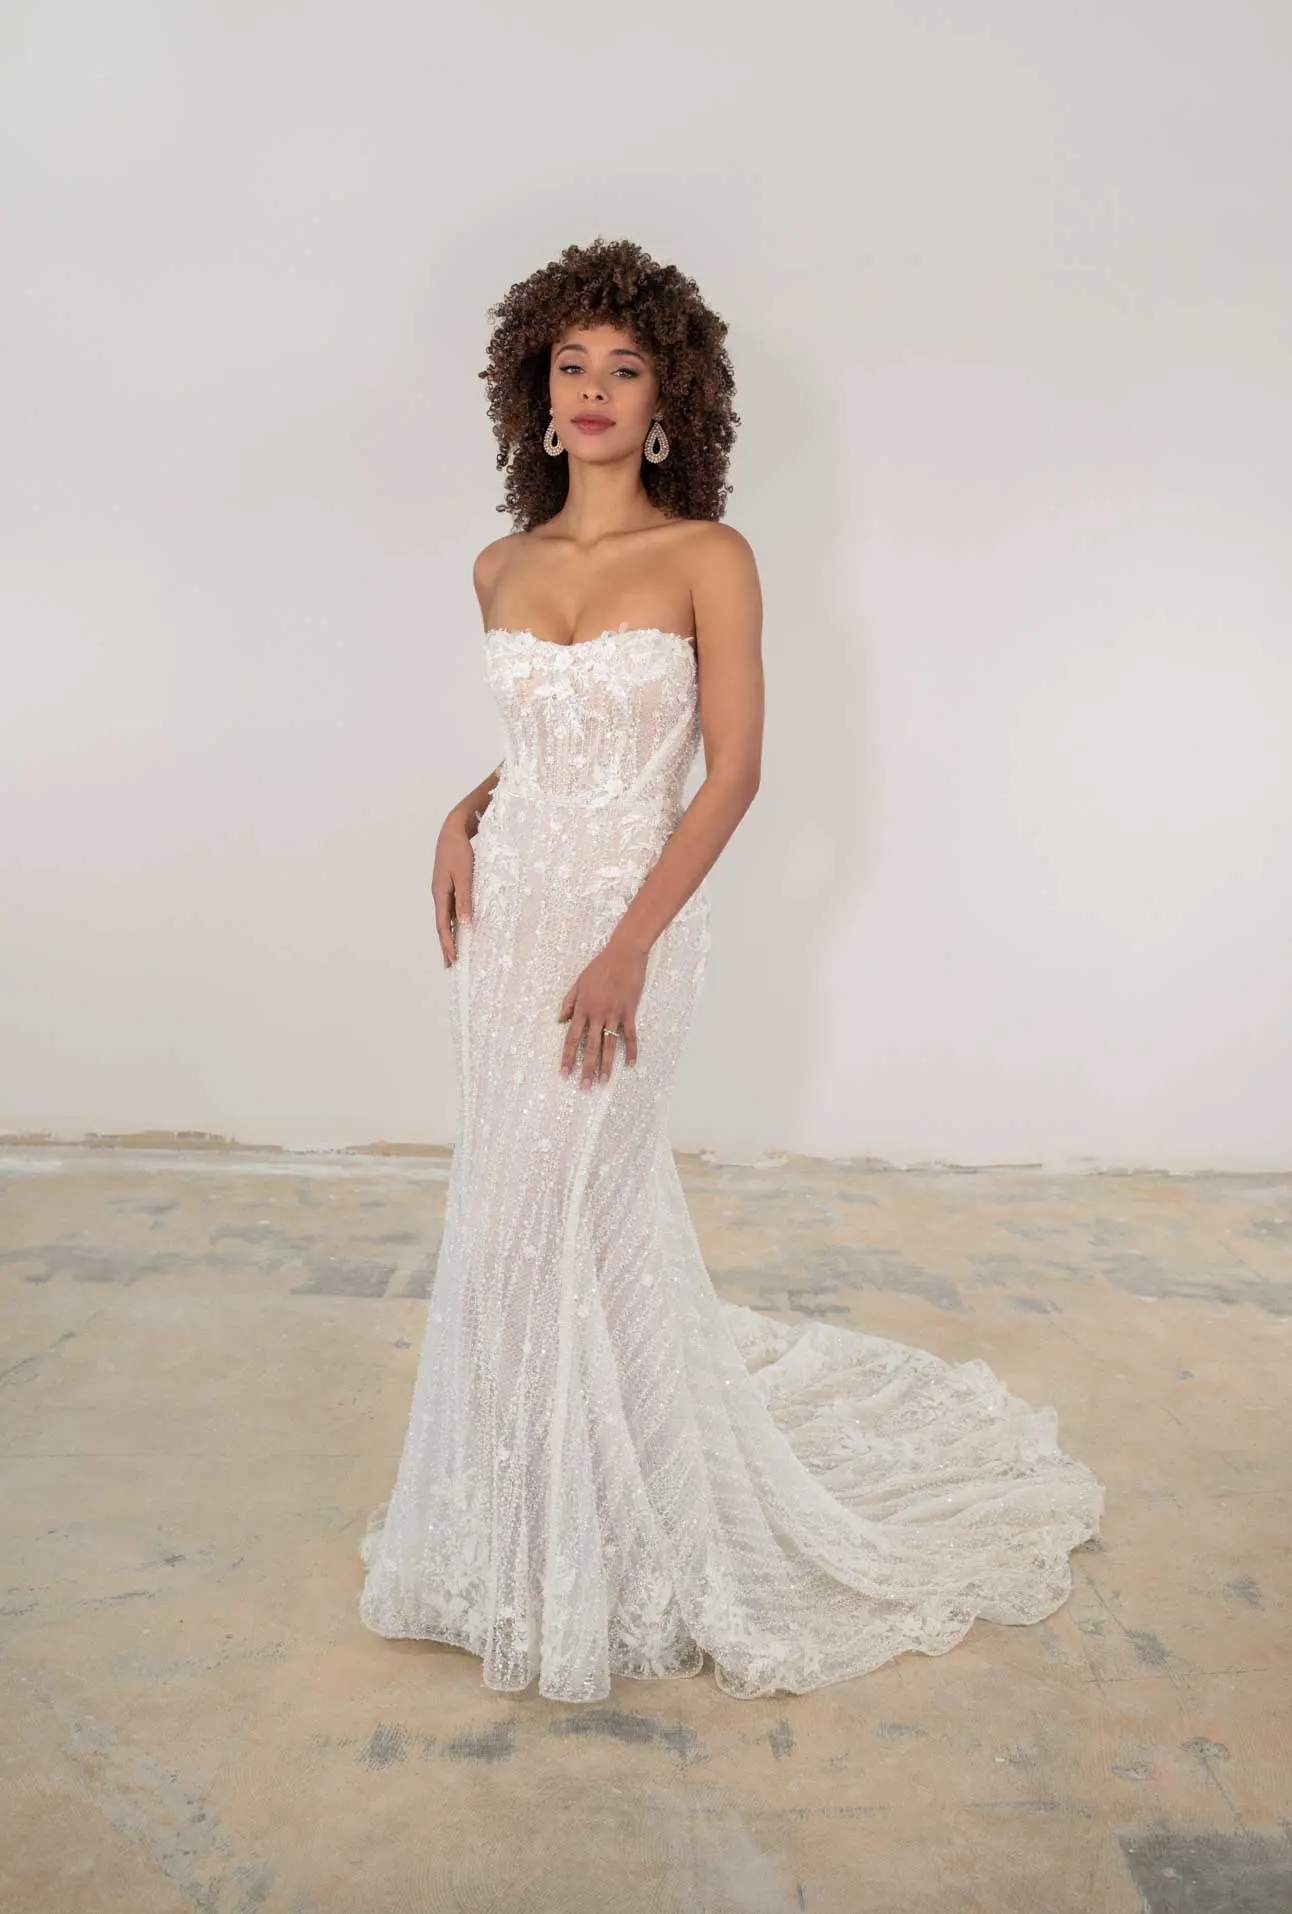 Sexy Couture Beaded Gown With Ruffled Overskirt by Martina Liana Luxe - Image 3